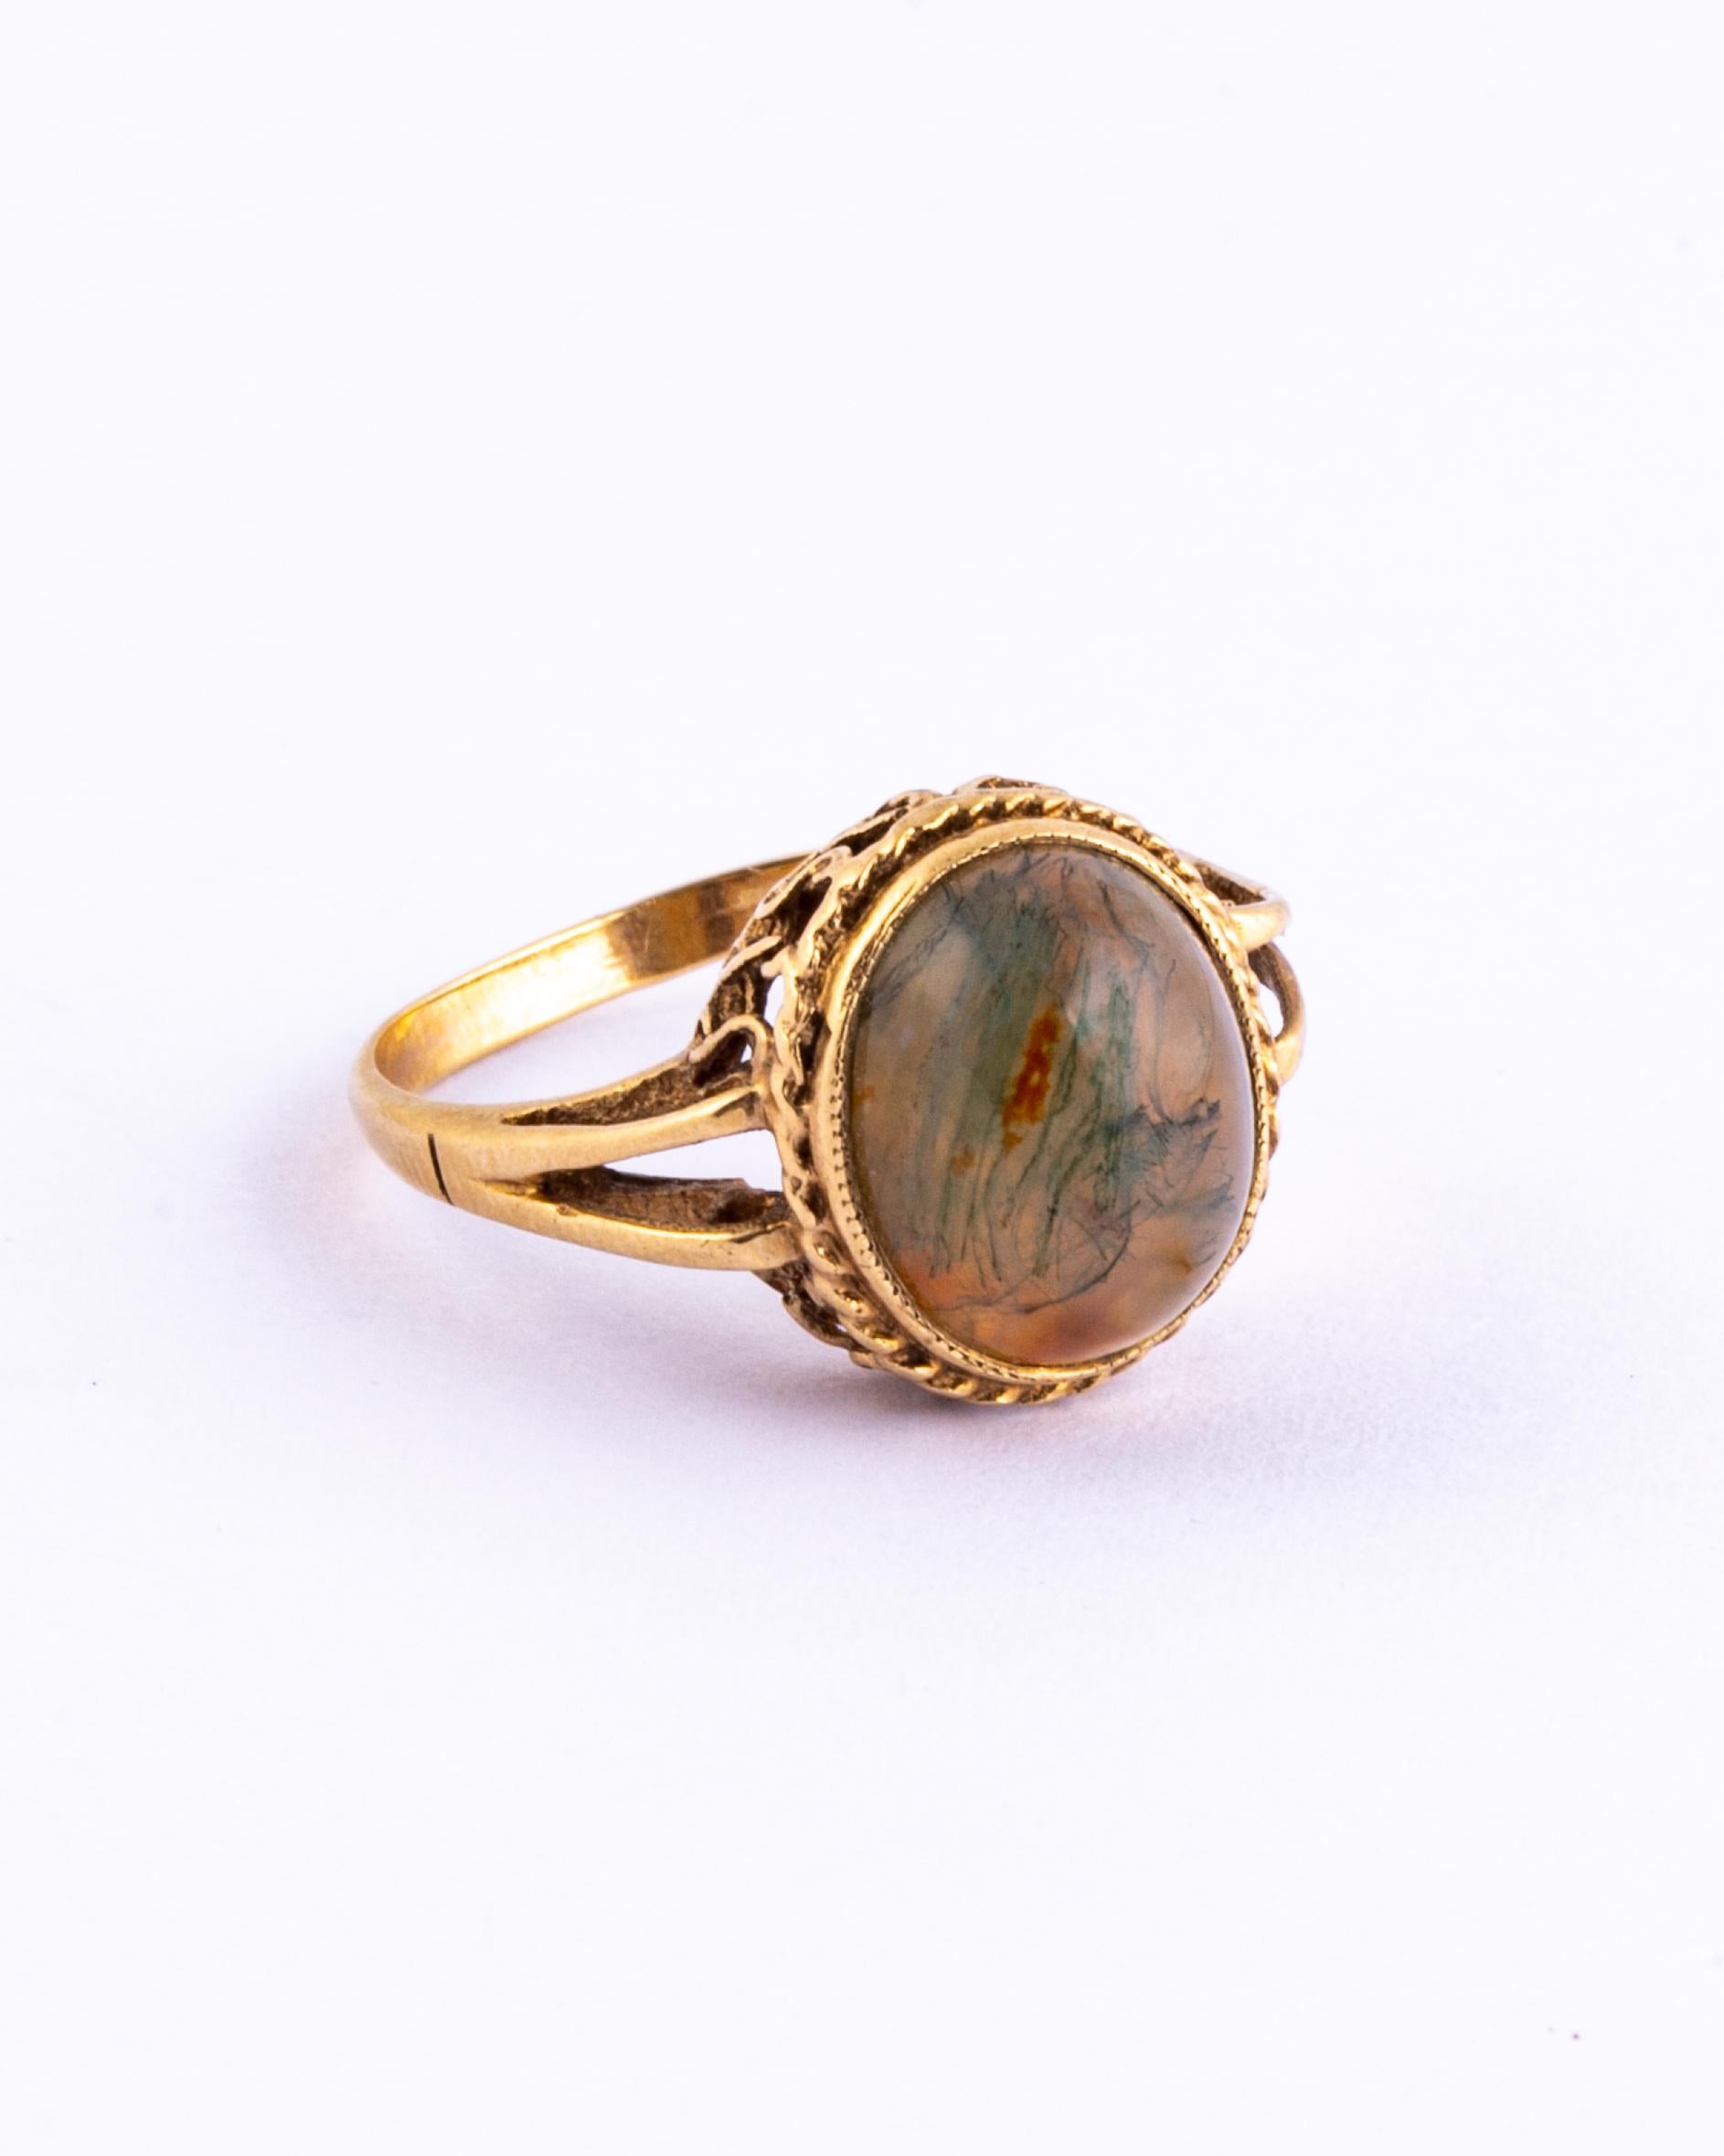 This wonderful moss agate stone has marbling of deep green and amber colour running through. Surrounding the stone there is a simple frame and a gorgeously ornate gallery. Made in Birmingham England. 

Ring Size: P 1/2 or 7 3/4 
Stone Dimensions: